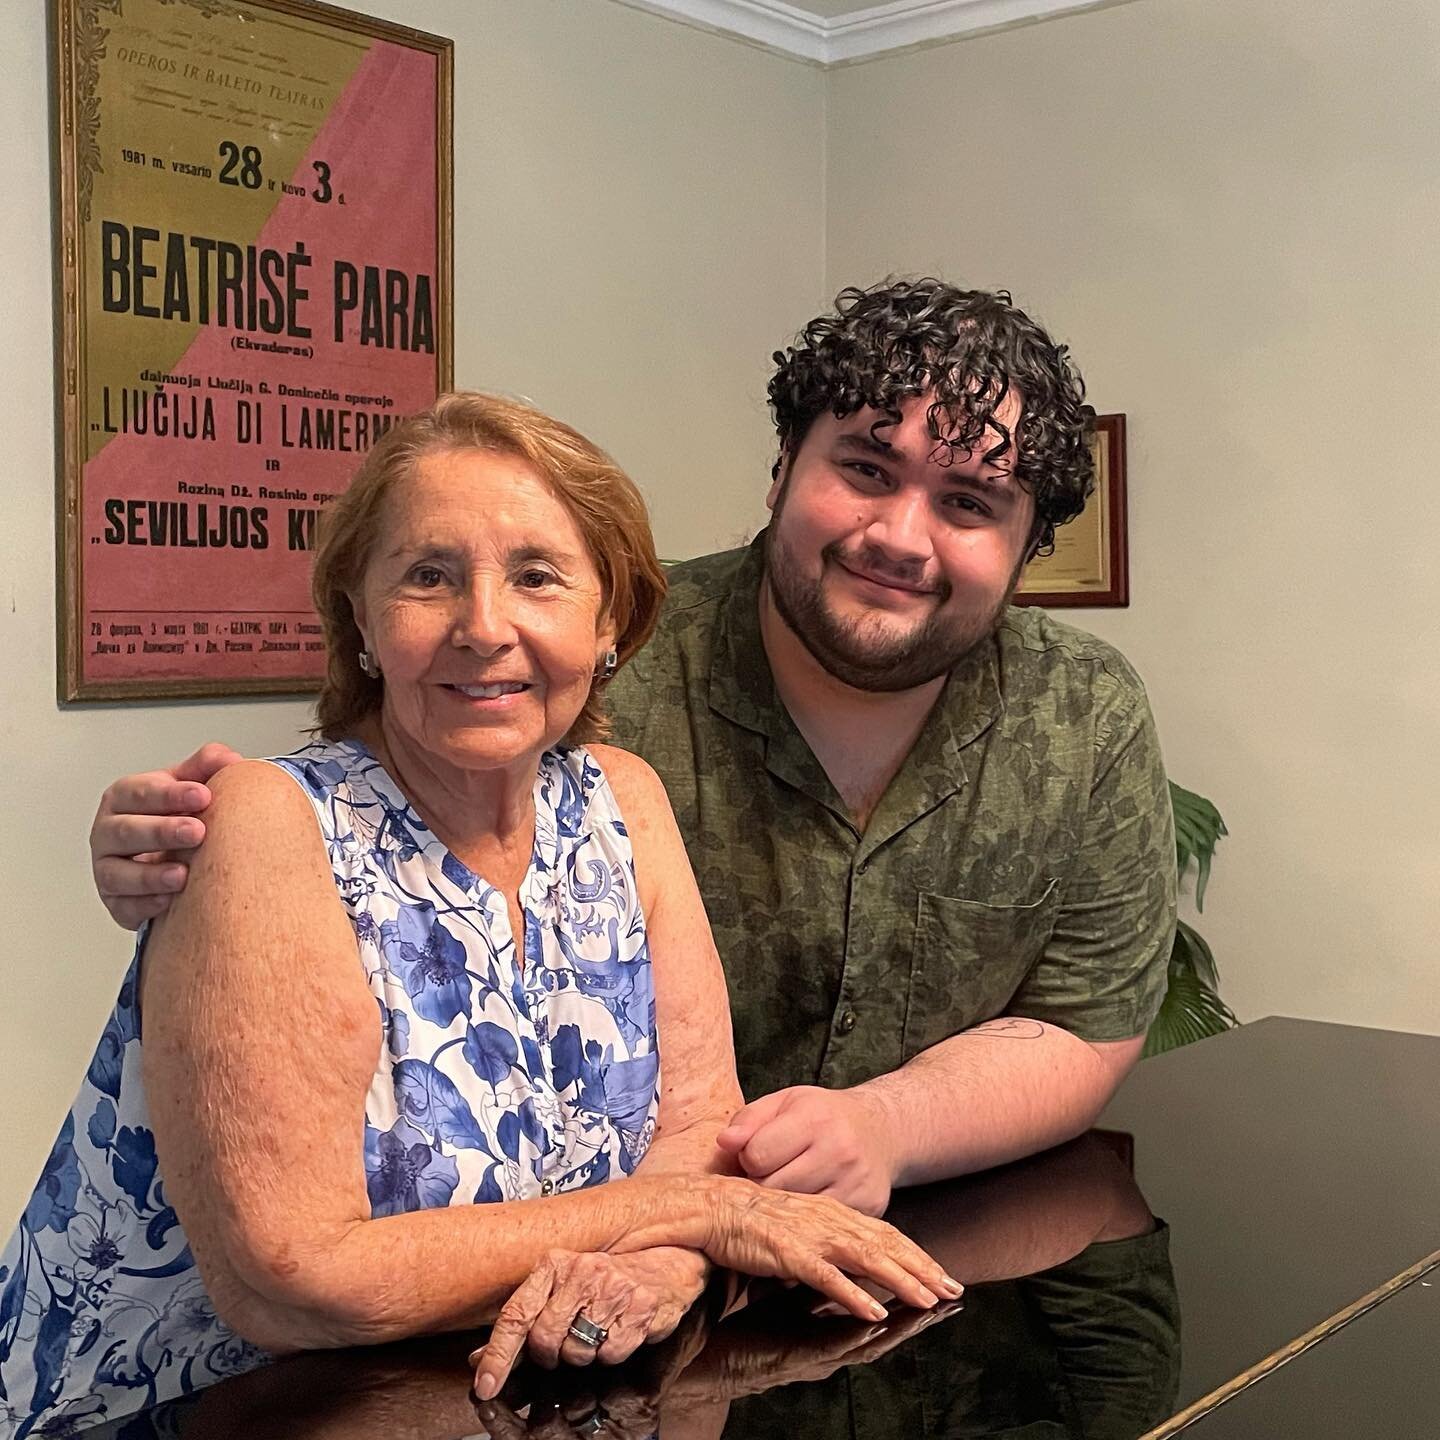 Meet Beatriz Parra Durango. Beatriz was my voice teacher in Ecuador, and one of the reasons I decided to study opera in the first place. She represented our country in a resplendent international career all over the Americas and Europe, became minist